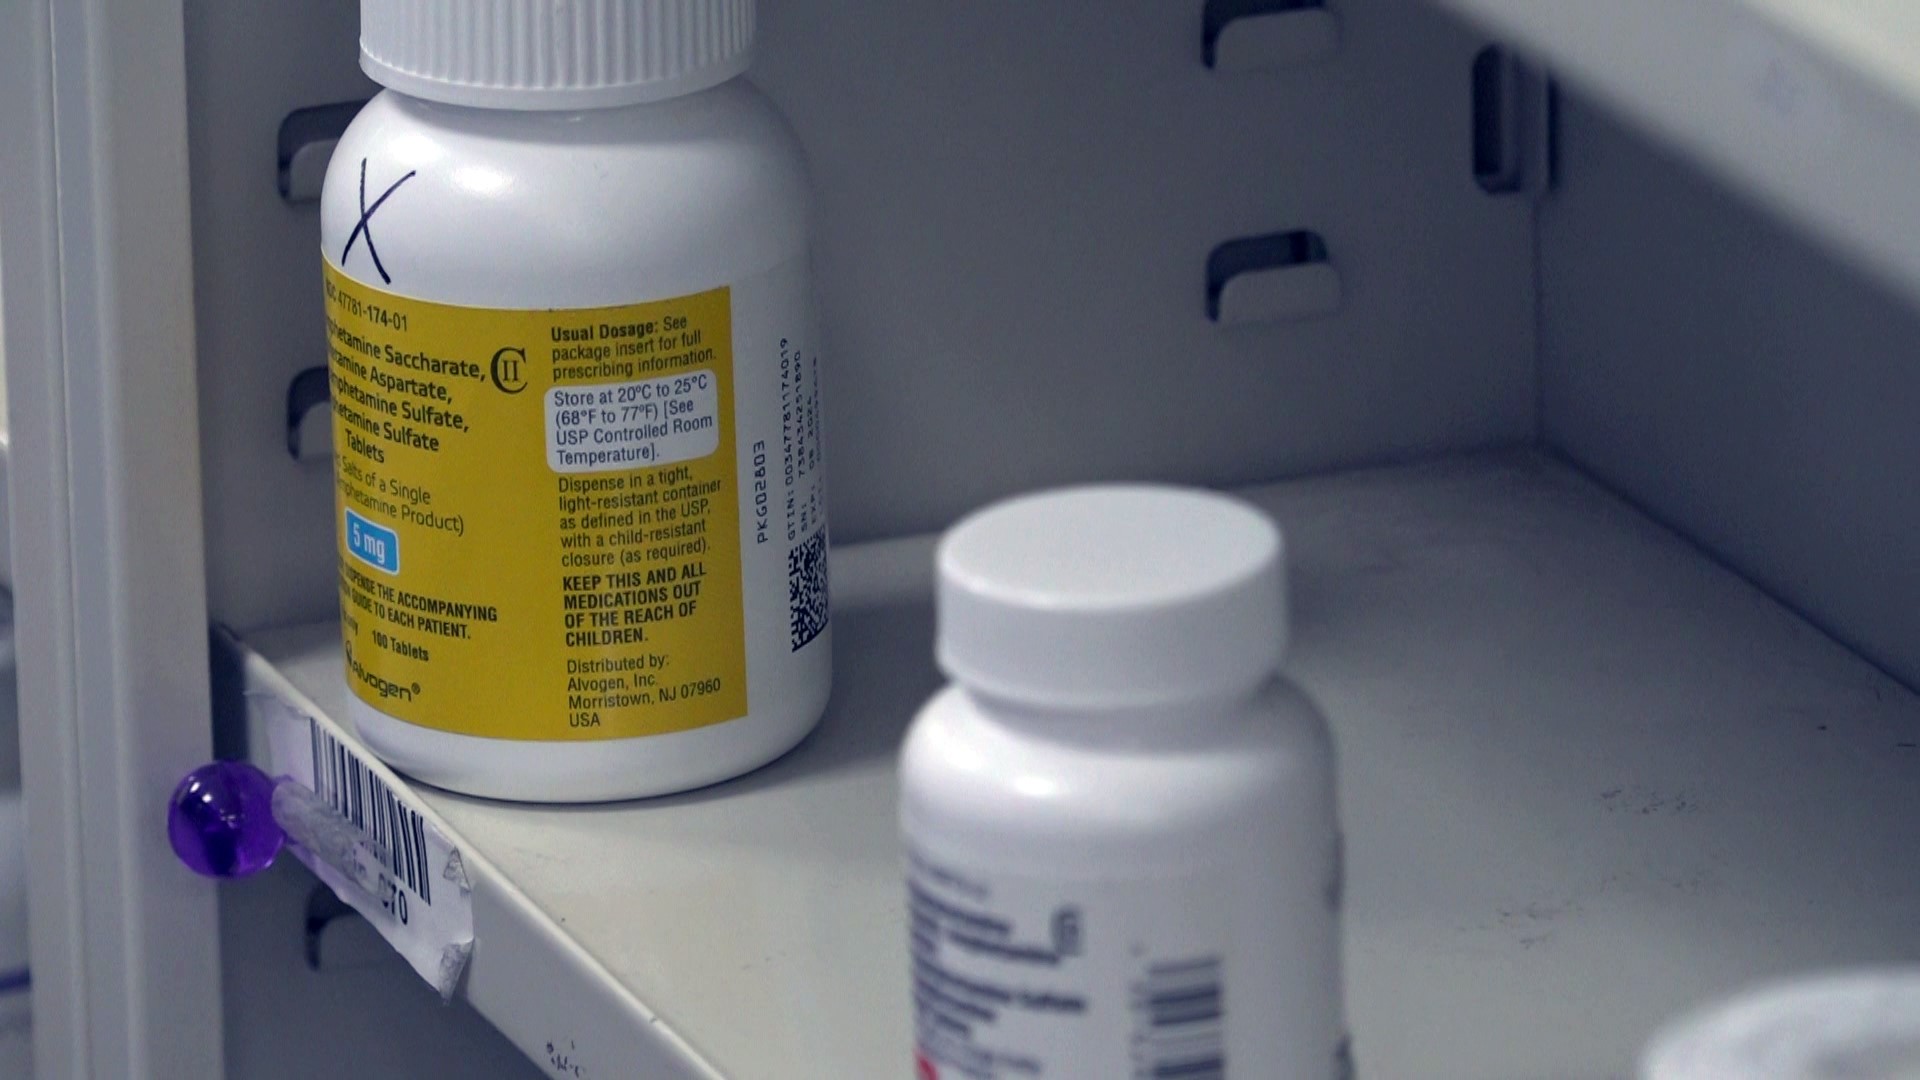 Arkansas pharmacies and patients are having trouble finding Adderall, leaving many struggling to stay healthy.